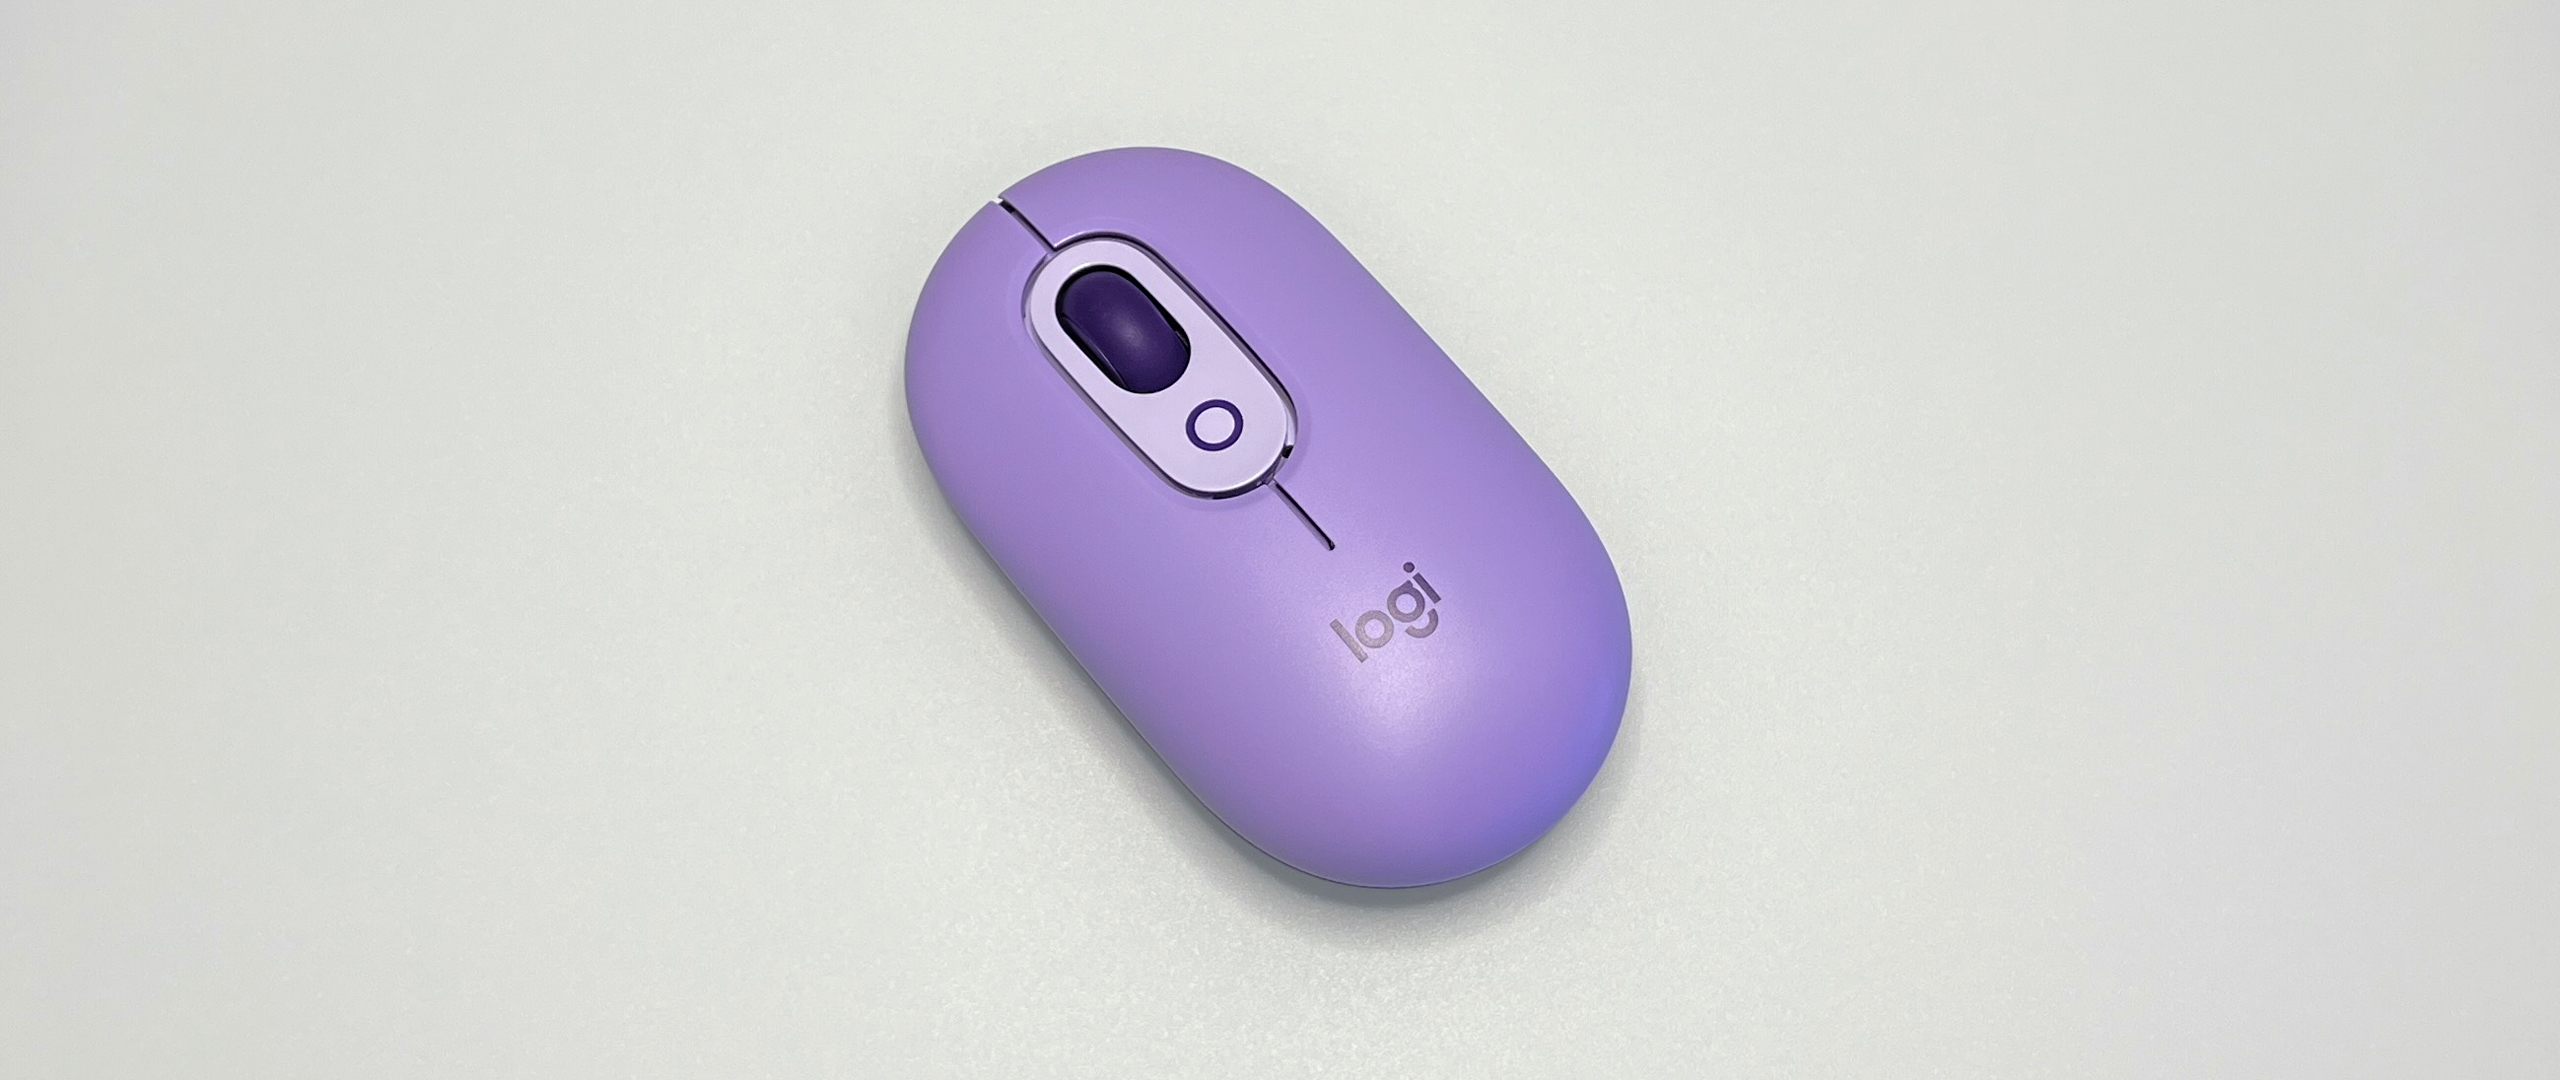 Logitech POP Mouse - How to Pair with USB Receiver (Bolt) 